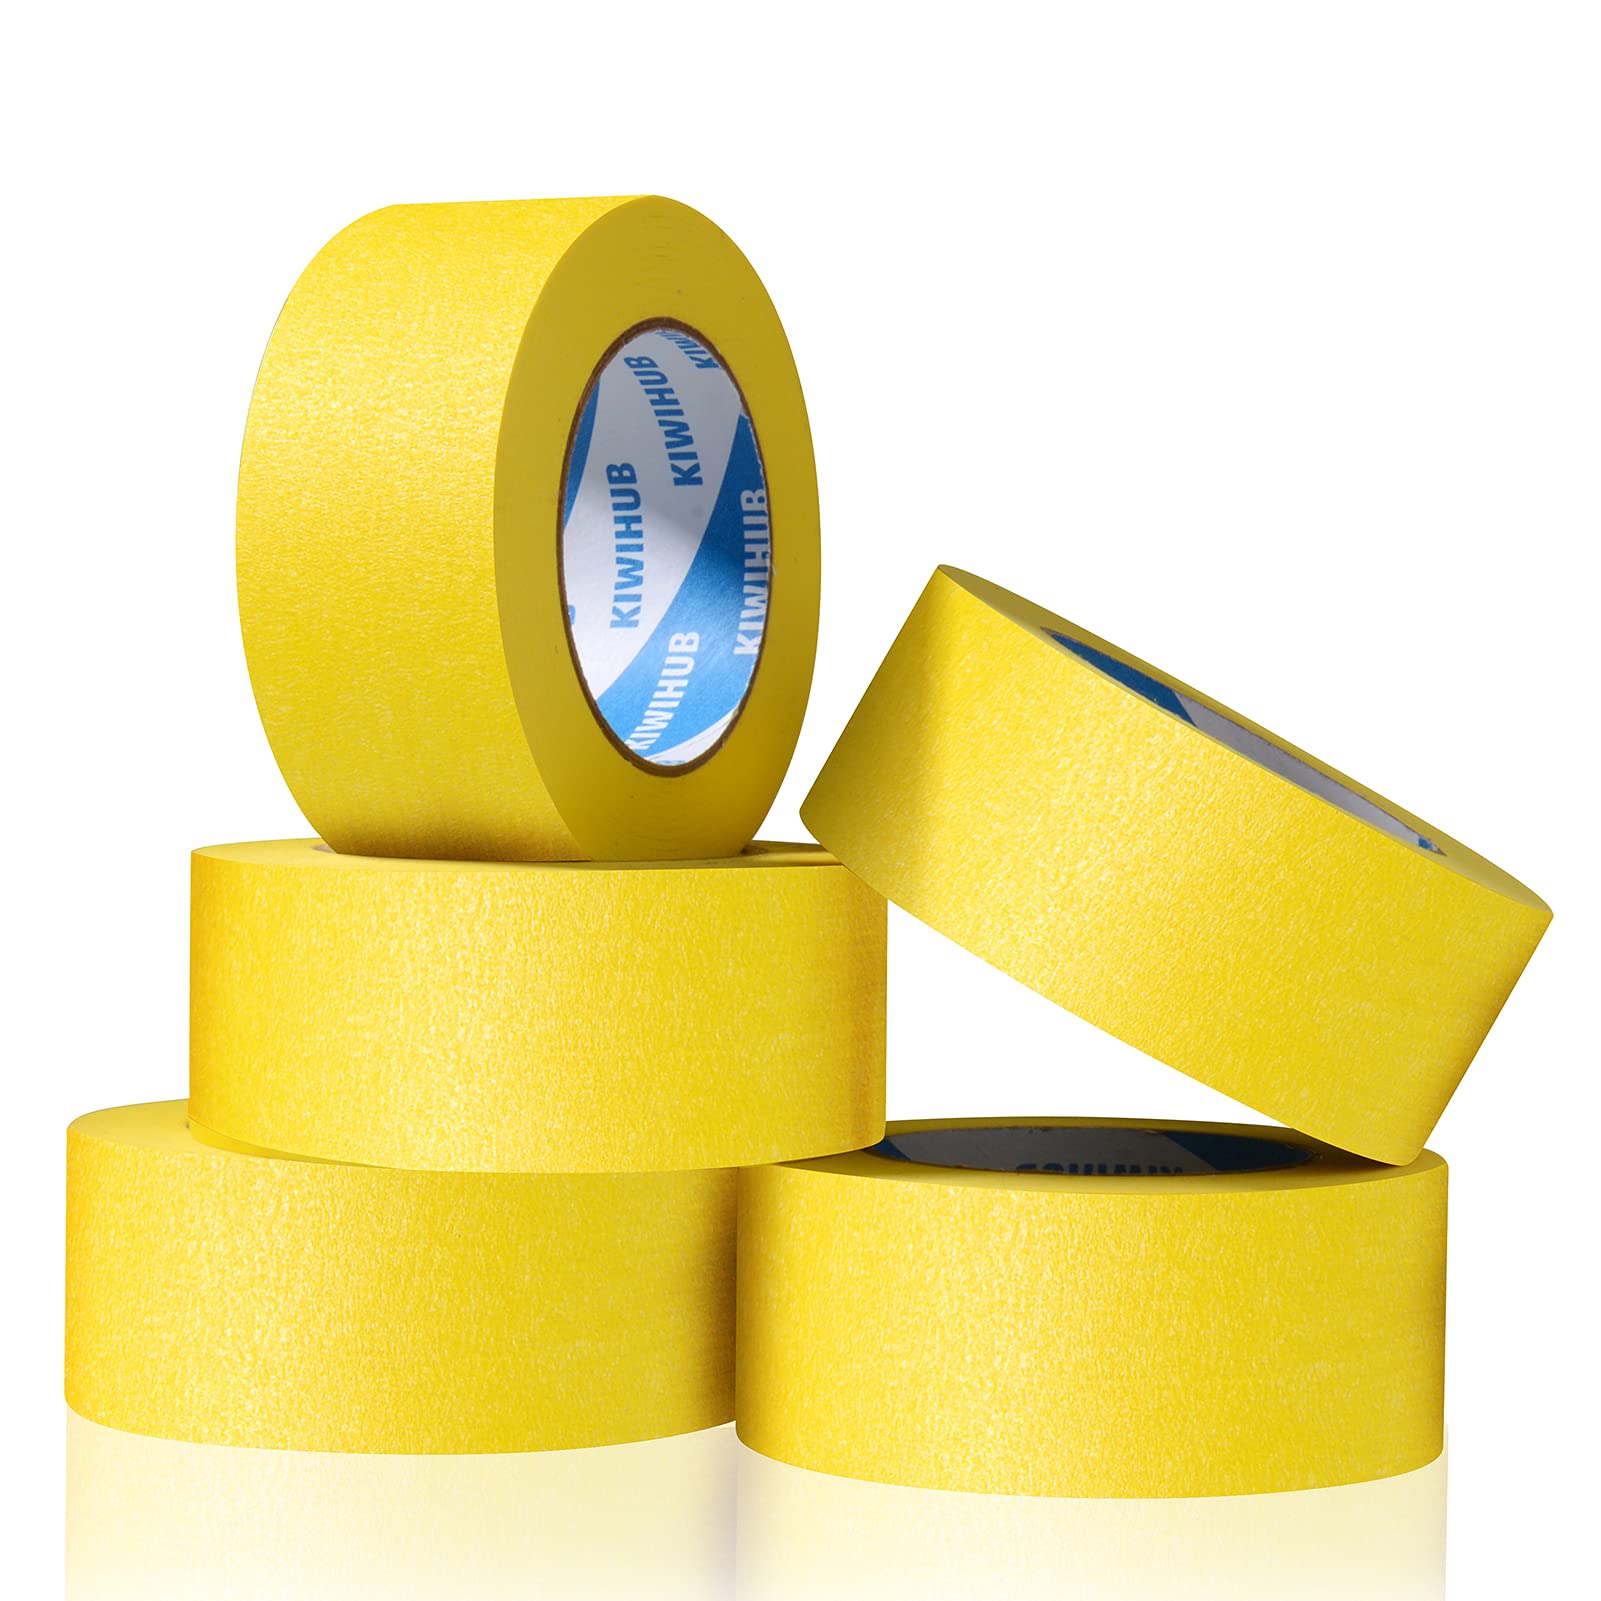 WOD Masking Tape 2 Inch for General Purpose - 1 Roll - 60 yards / roll